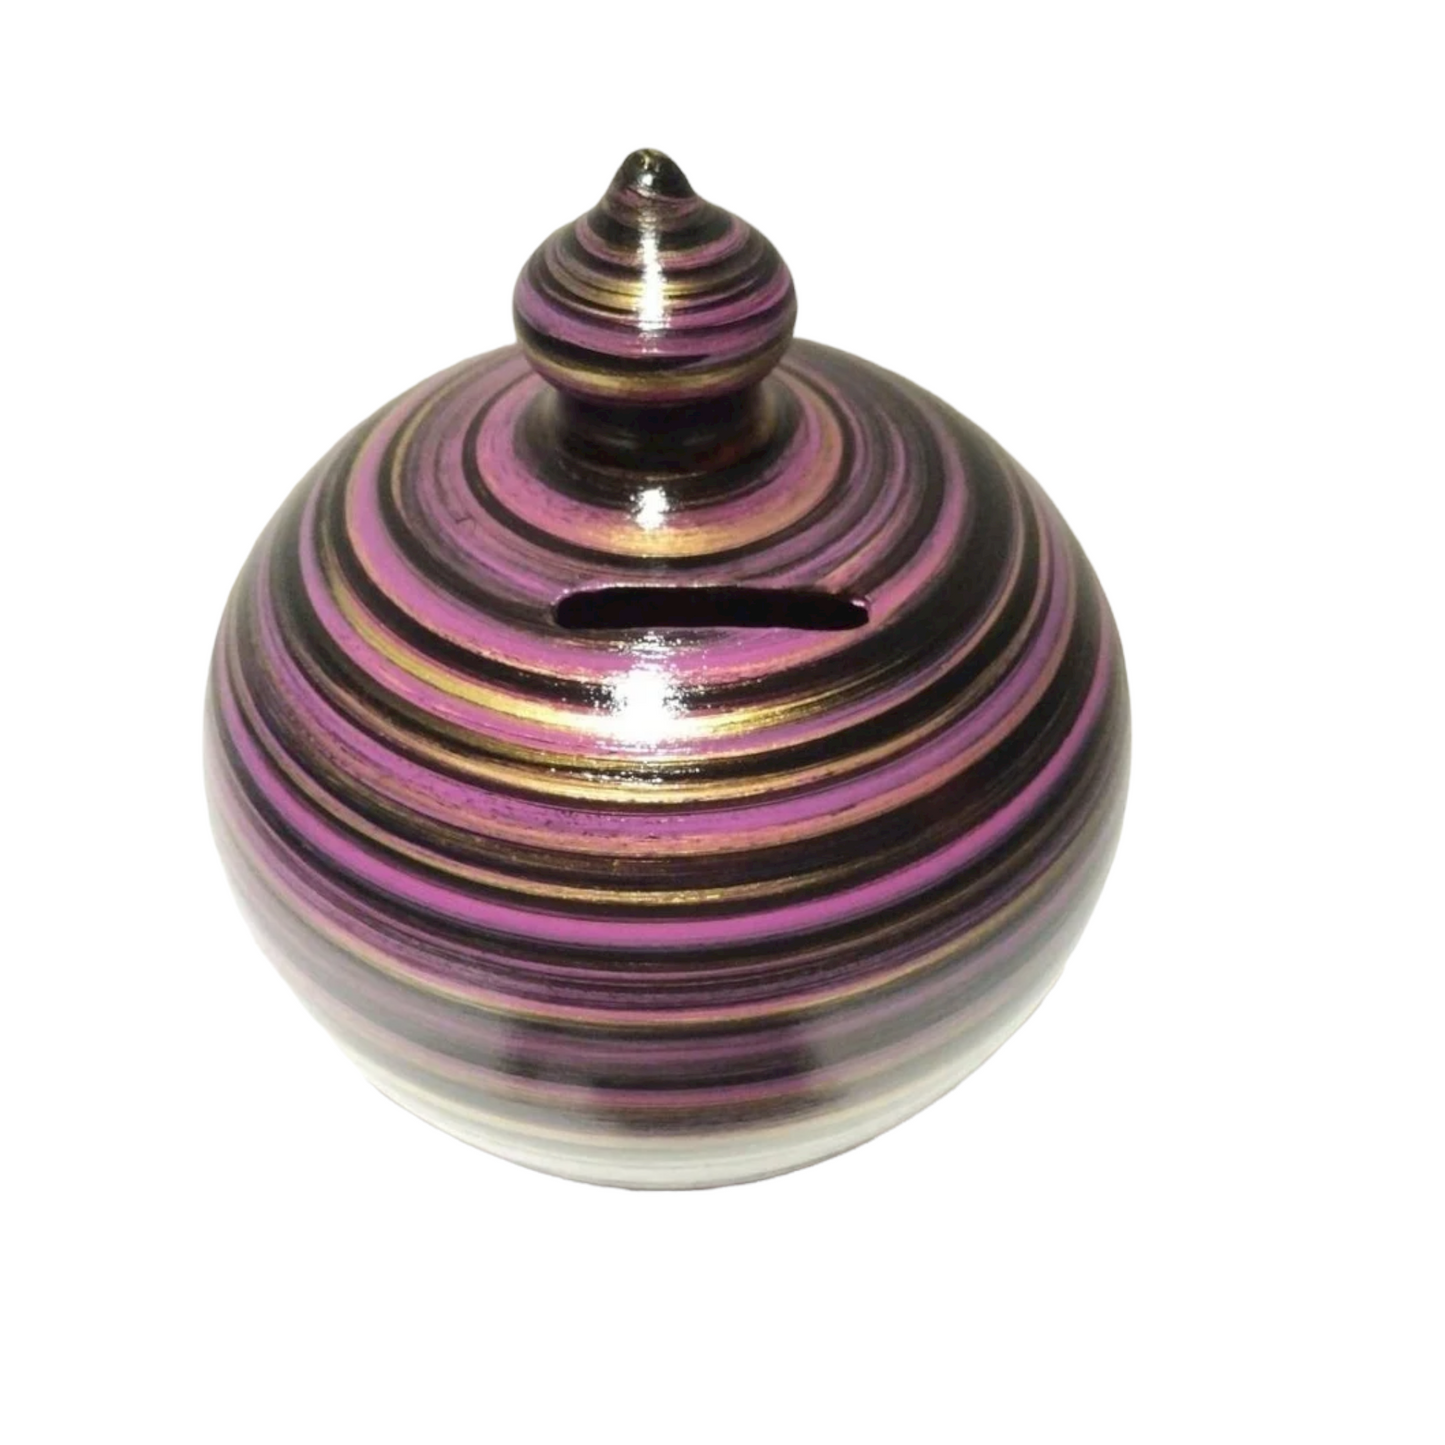 A coin bank for your cash savings, so stunning and stylish that you will never want to break open. Handmade to order in my studio in Rome, Italy, it is the perfect gift both for women and men.  💰Size: 30 cm = 11.81 inches in height. Circumference: 72 cm = 28.3 inches  ⭐Colors: Purple, Black & Gold, as in picture.  With hole and stopper plug, or without hole.